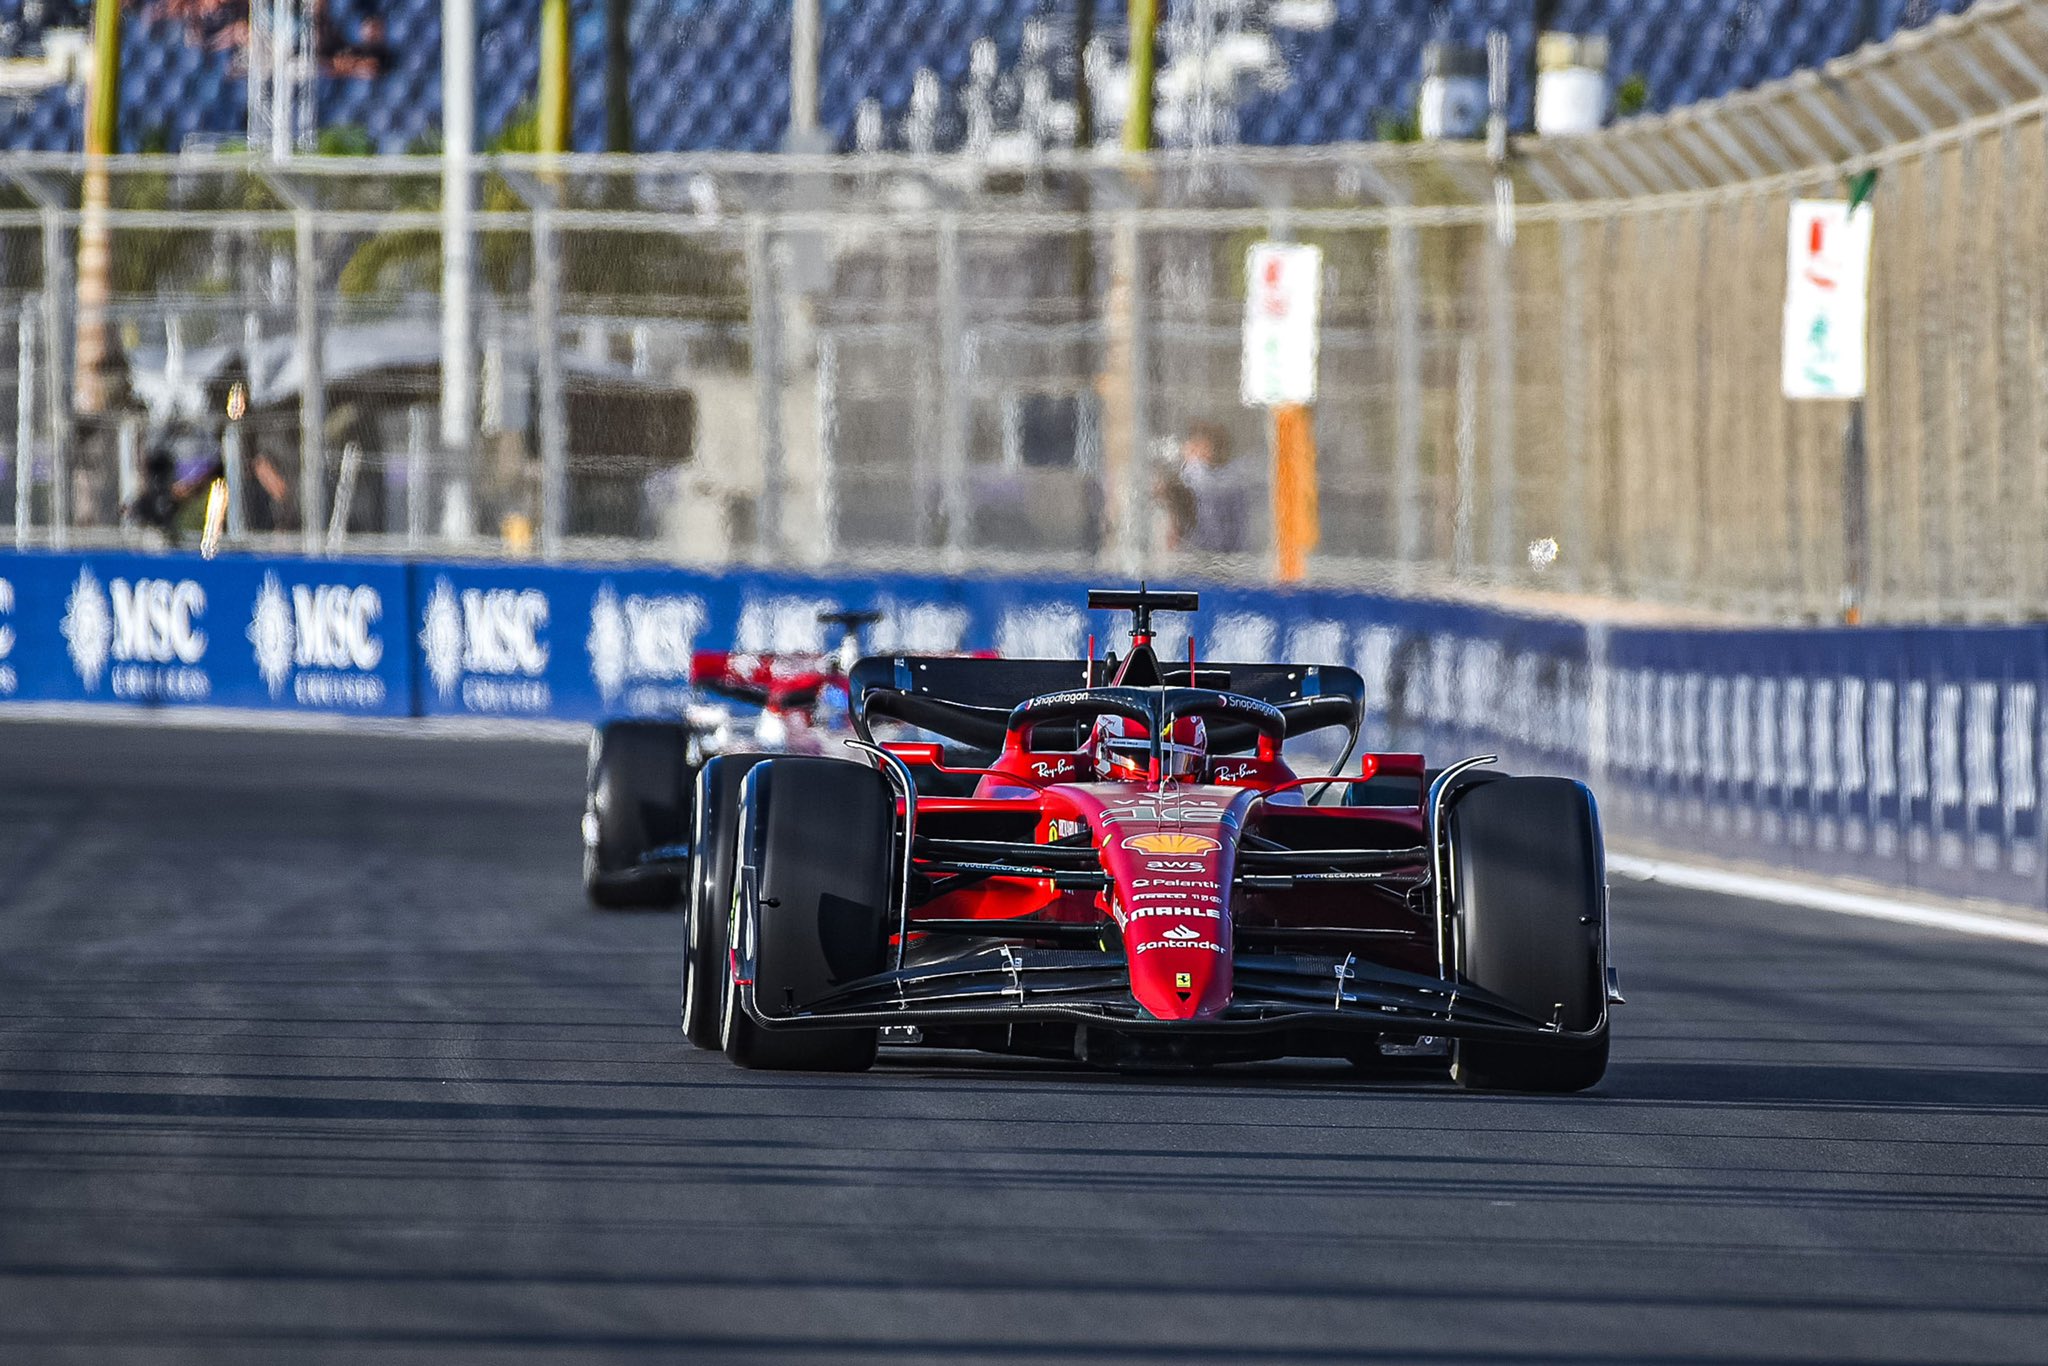 Charles Leclerc fastest in Friday Practice